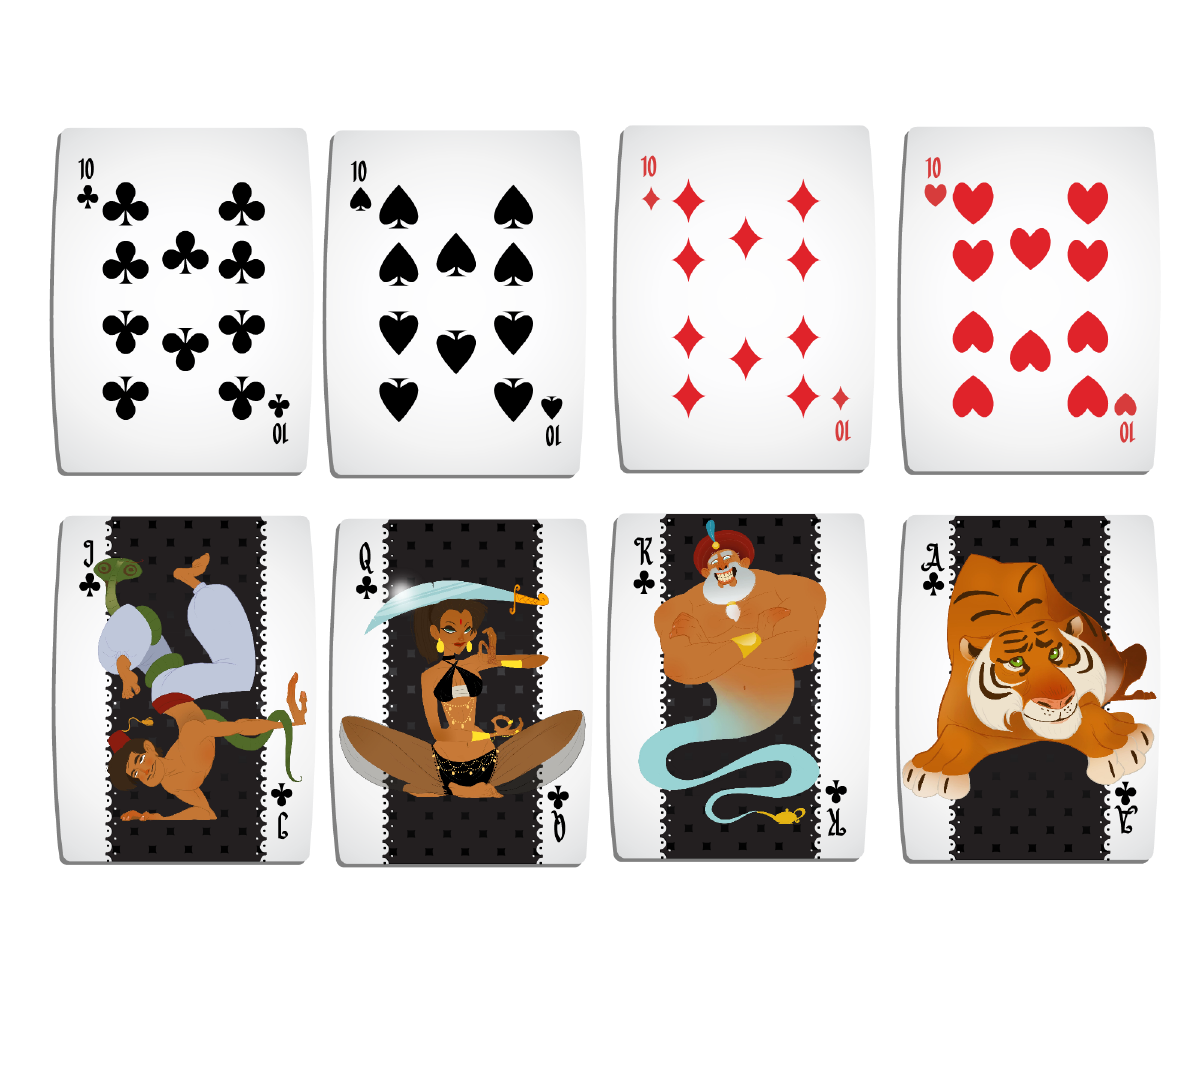 cards Poker game card deck photoshop pinups ace jack king aces spades Flowers diamonds play